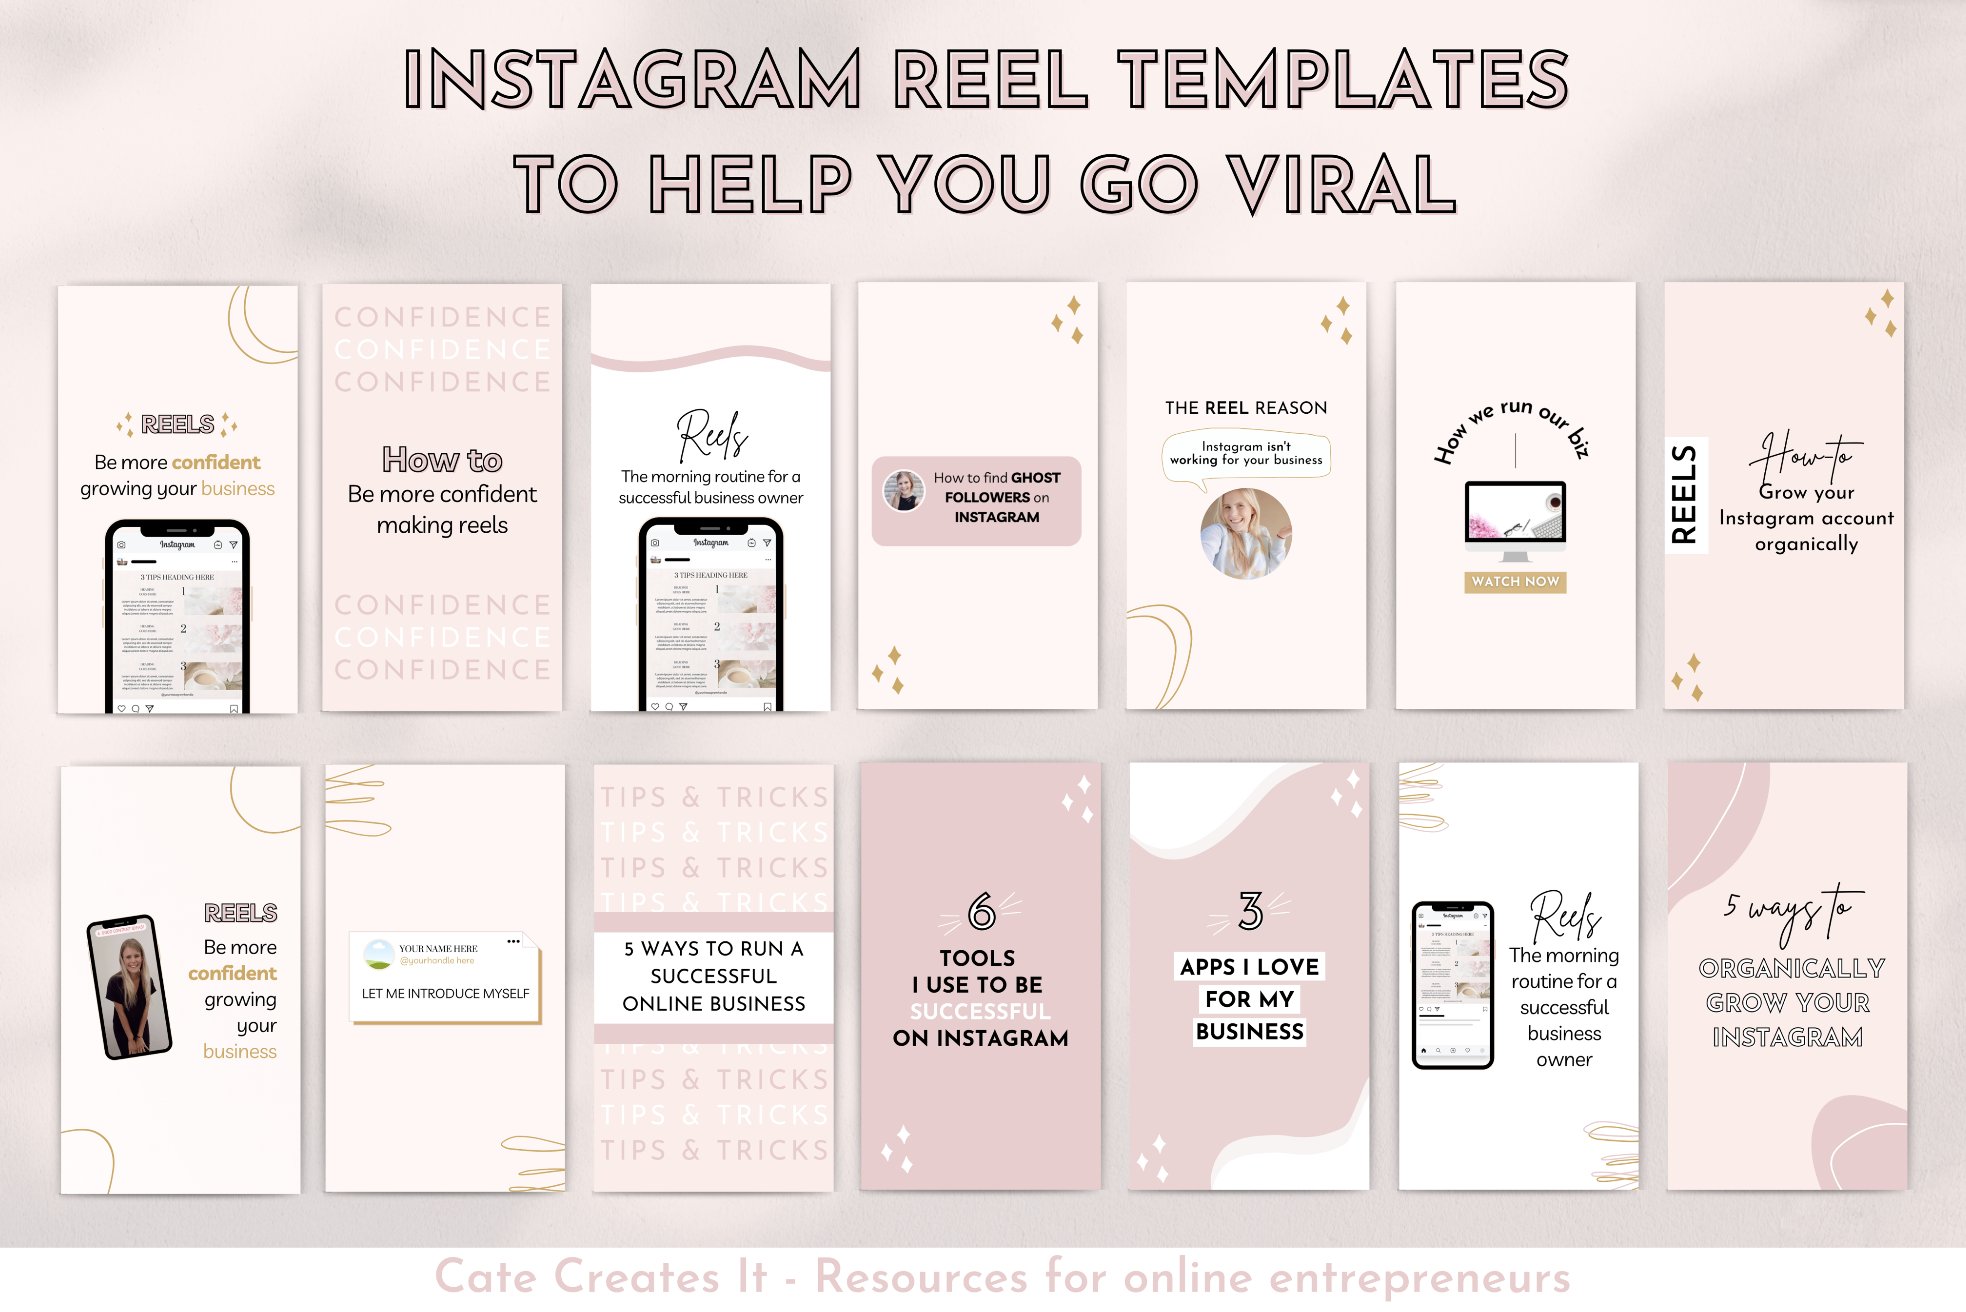 How to Craft an Instagram Reel Template for Your Brand